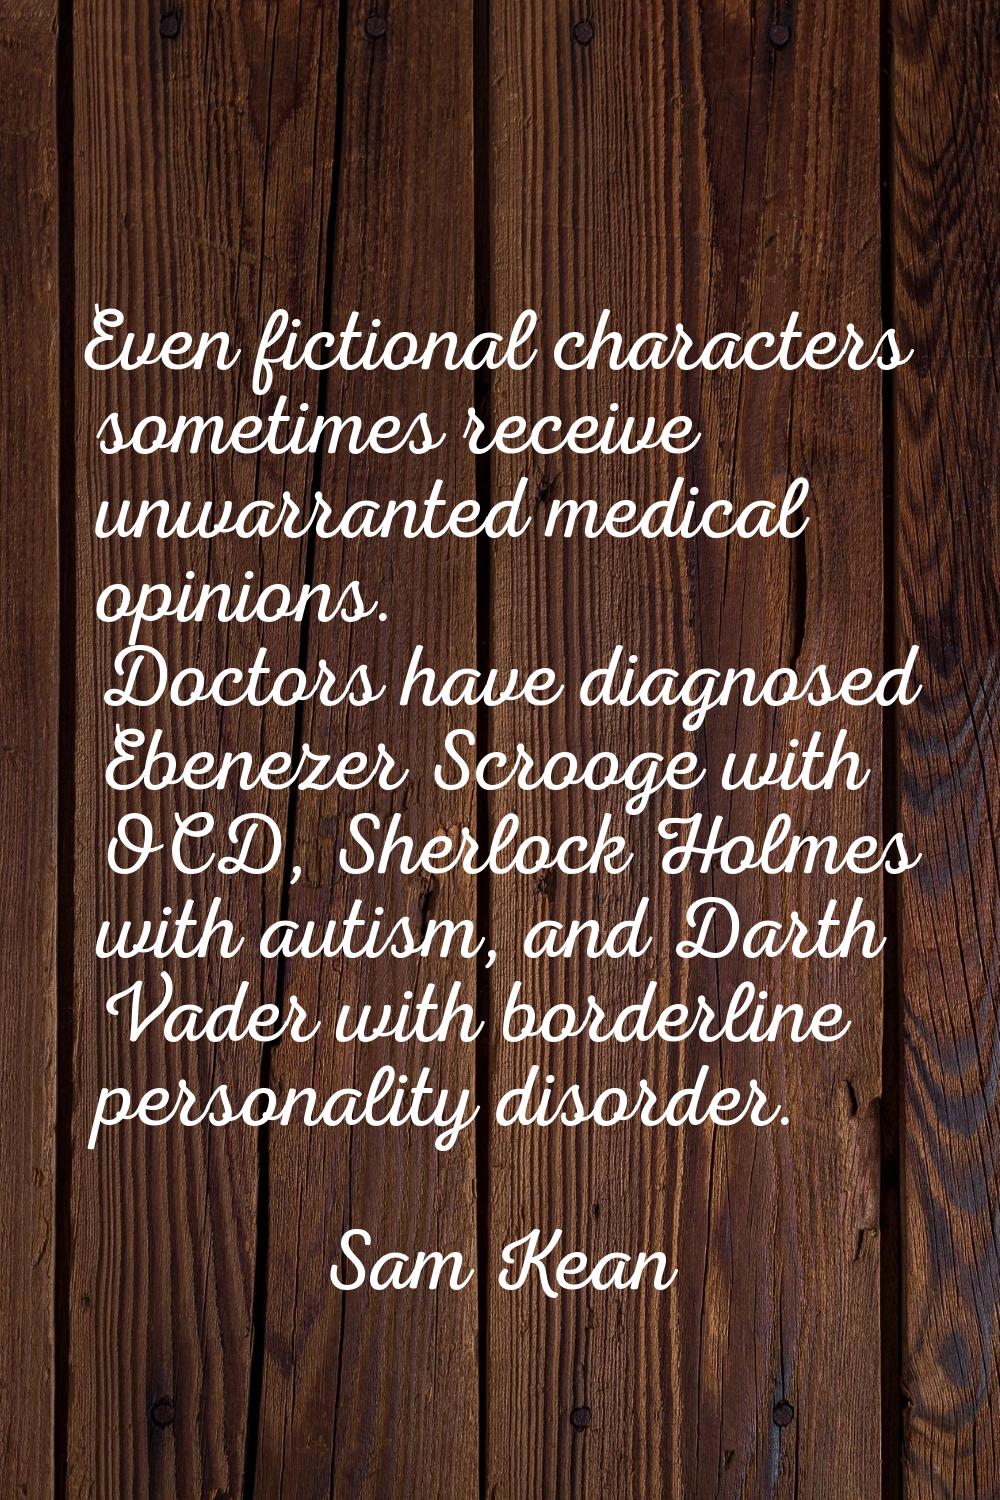 Even fictional characters sometimes receive unwarranted medical opinions. Doctors have diagnosed Eb